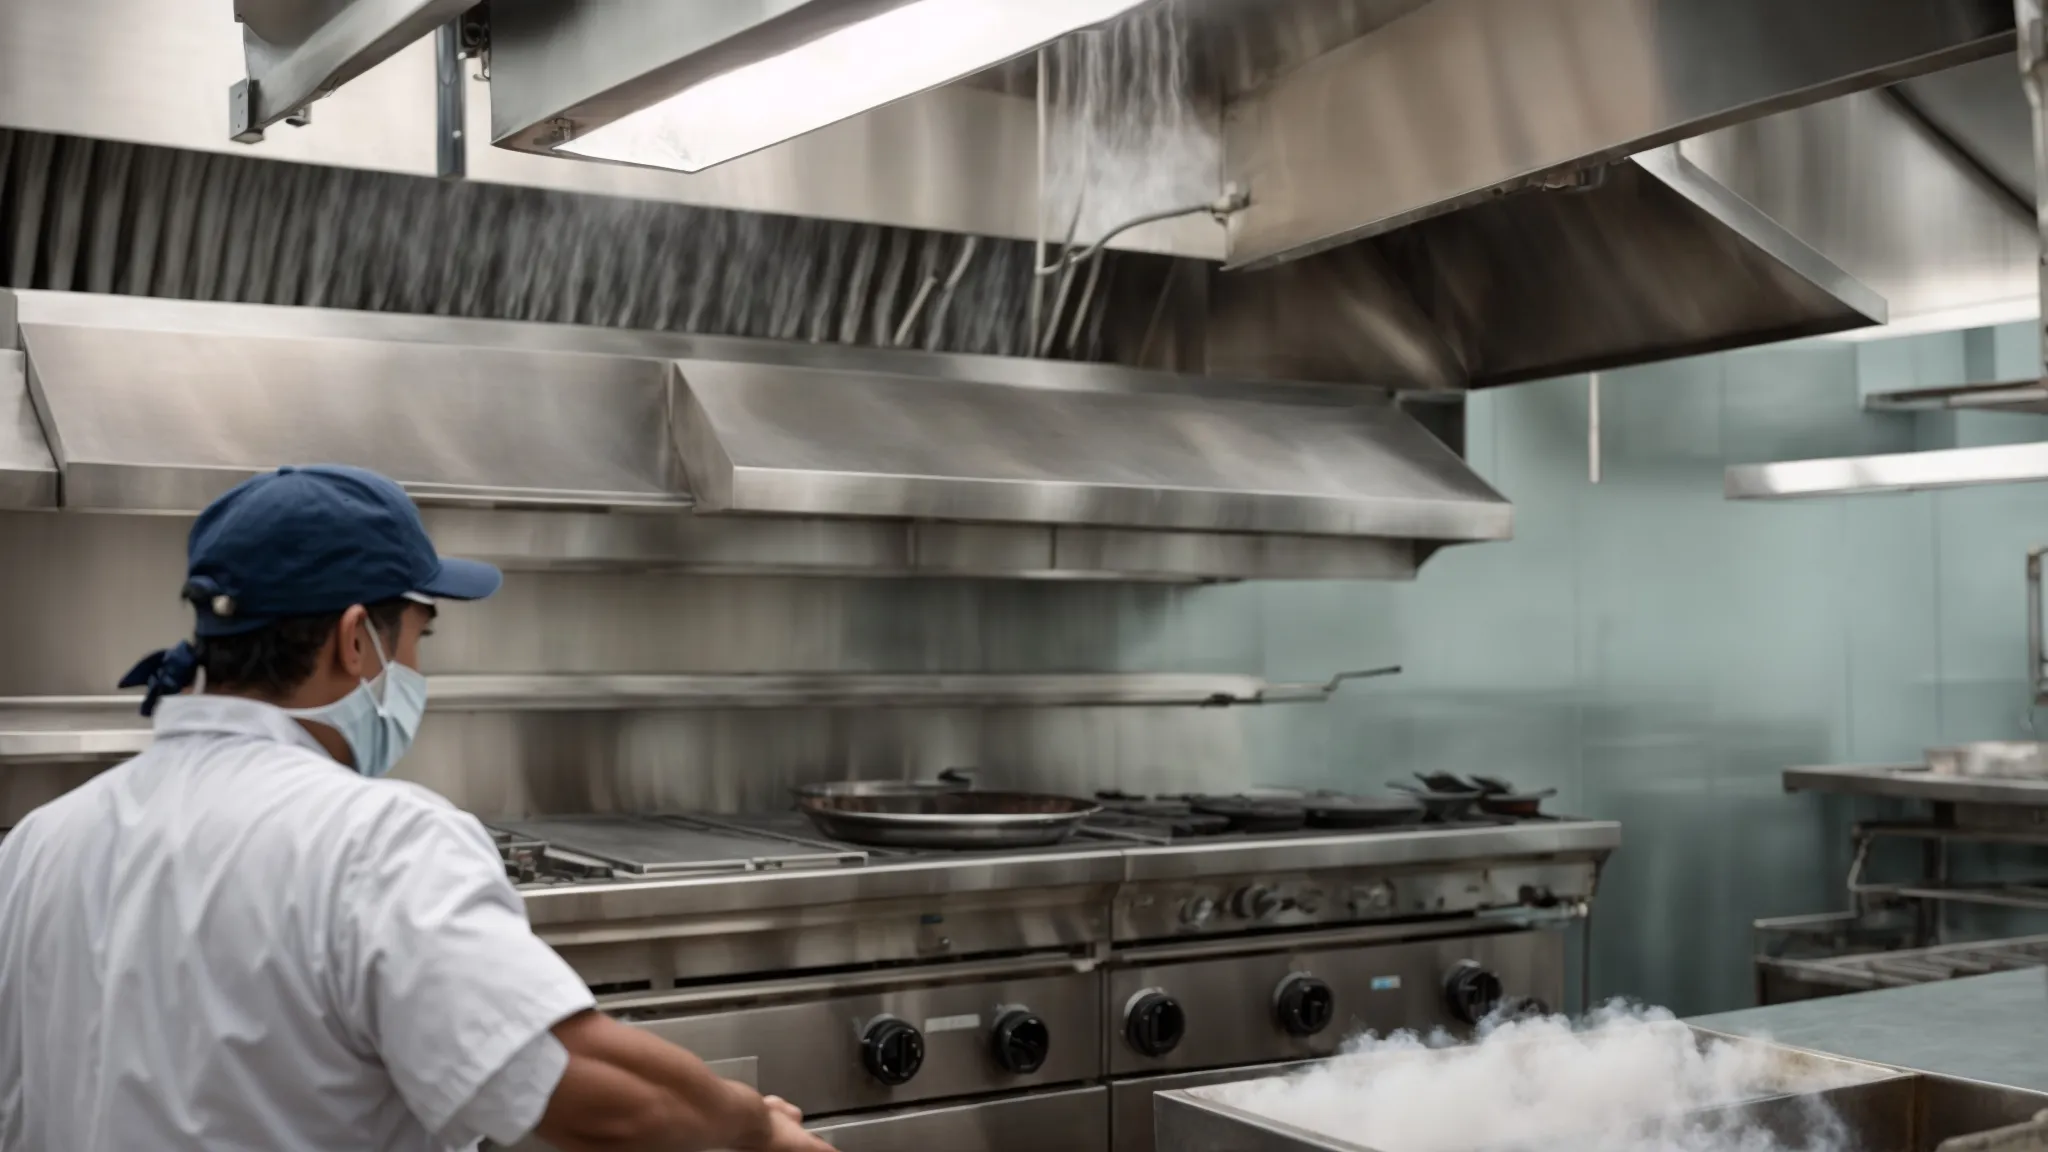 a professional cleaner is power-washing a commercial kitchen exhaust hood in Toronto Hood Cleaning, surrounded by steam.